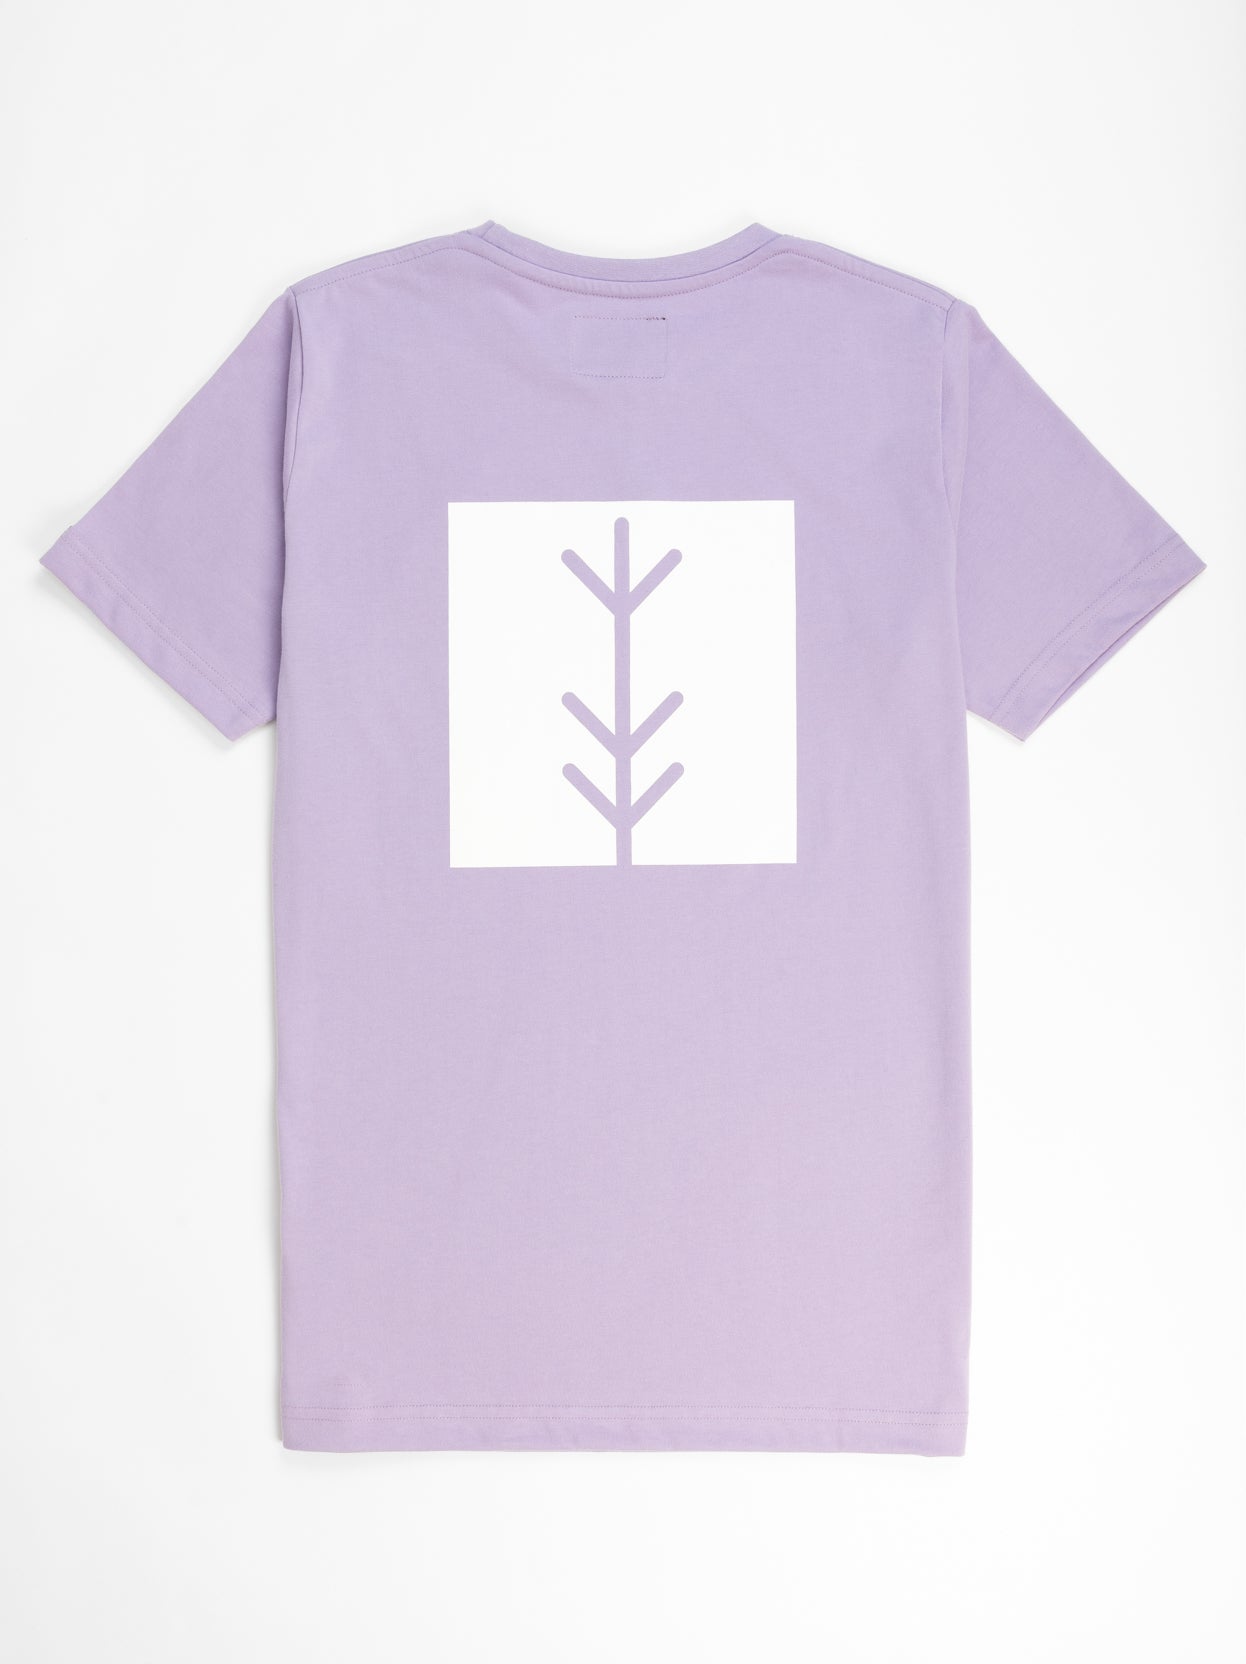 Lilac Travel Tee back